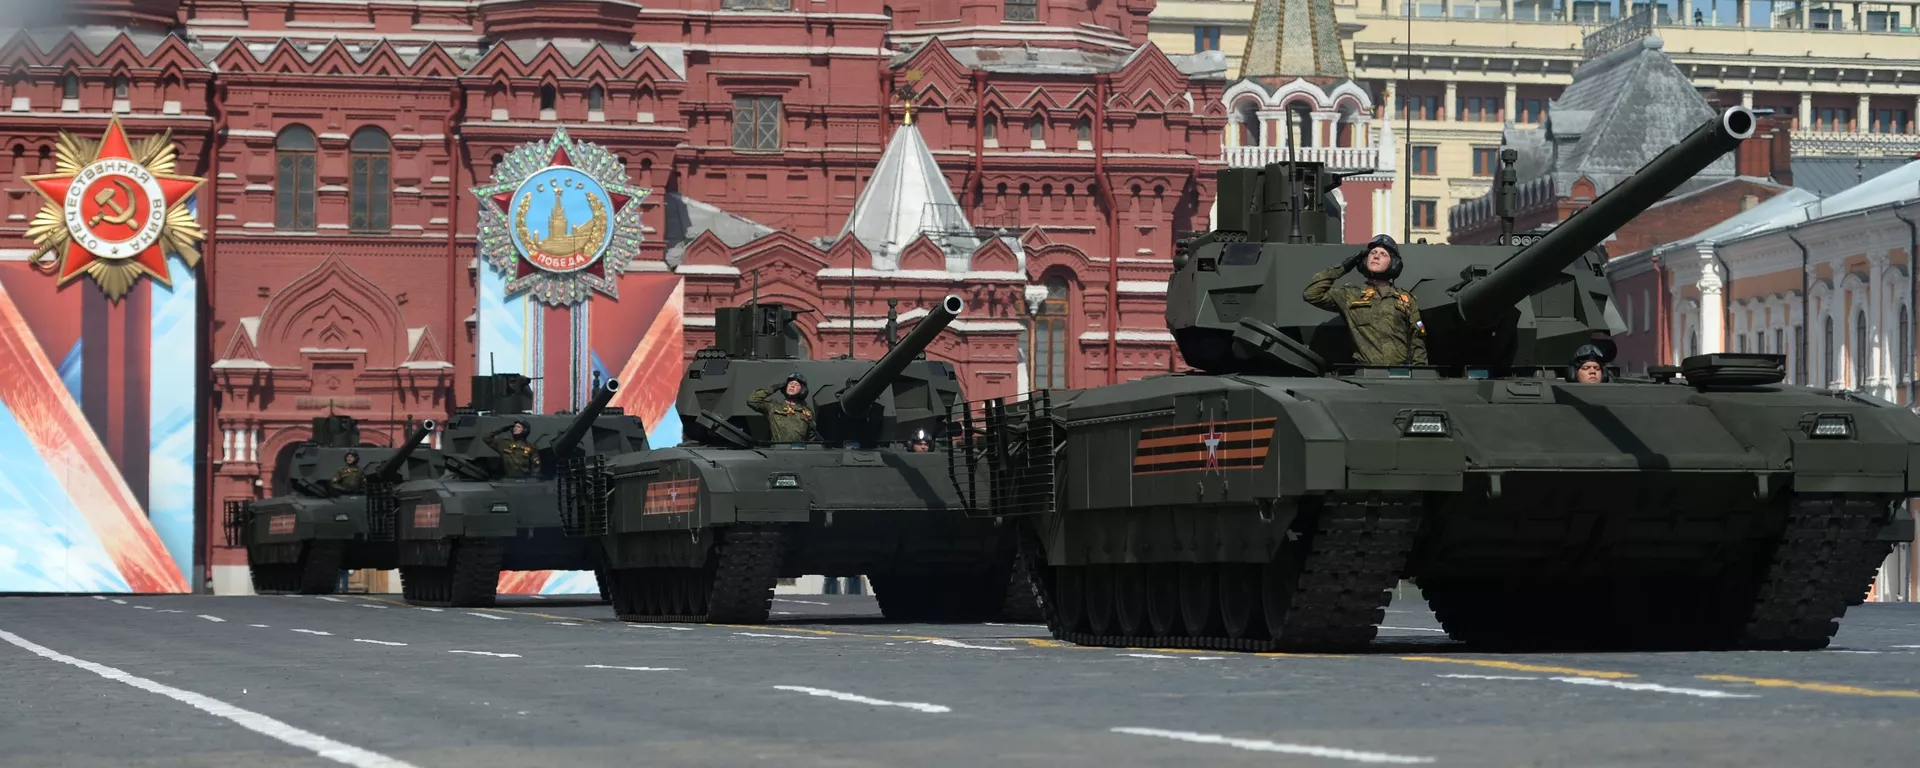 Armata T-14 tanks on Red Square, Moscow during the final practice of the military parade marking the 71st anniversary of the victory in the Great Patriotic War, May 2016. - Sputnik International, 1920, 25.04.2023